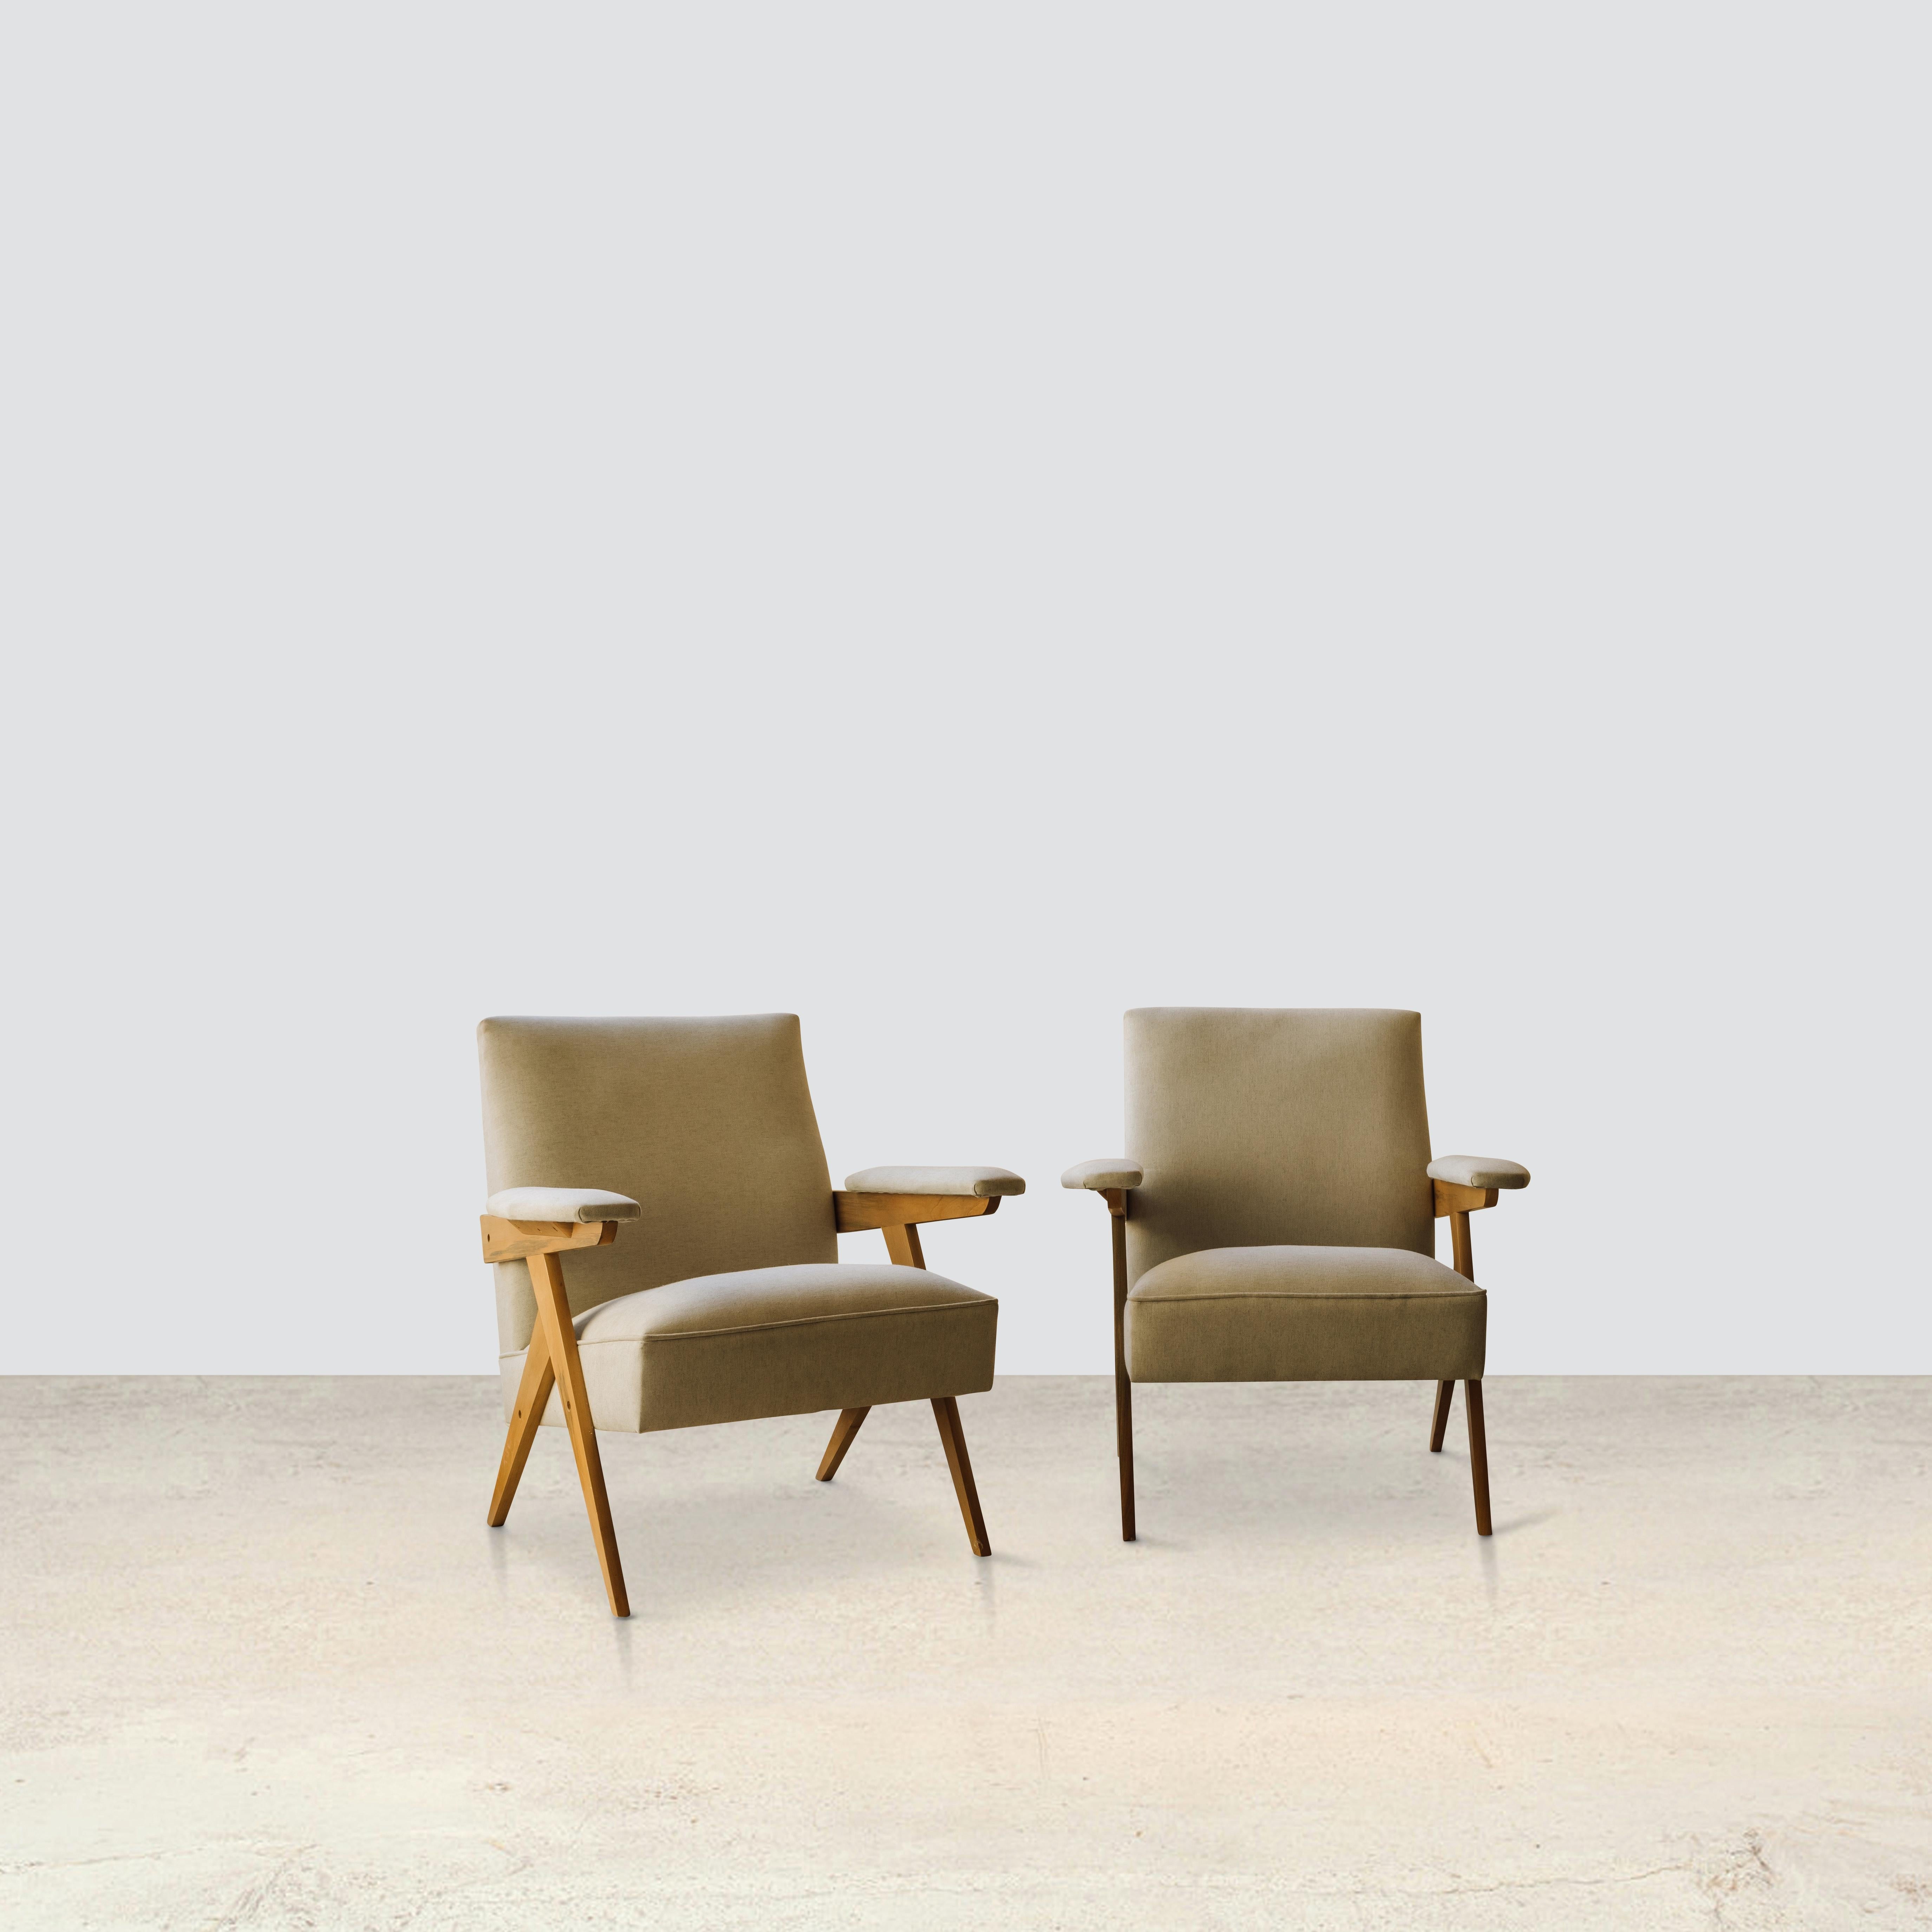 Z Lounge Armchair
By Zanine Caldas 1950

Pair of 2 Z Lounge Armchair designed by Zanine Caldas and manufactured by Movies Artisticos Z. A Brazilian pioneer to the industrialization of the furniture manufacturing process, José Zanine Caldas, honed